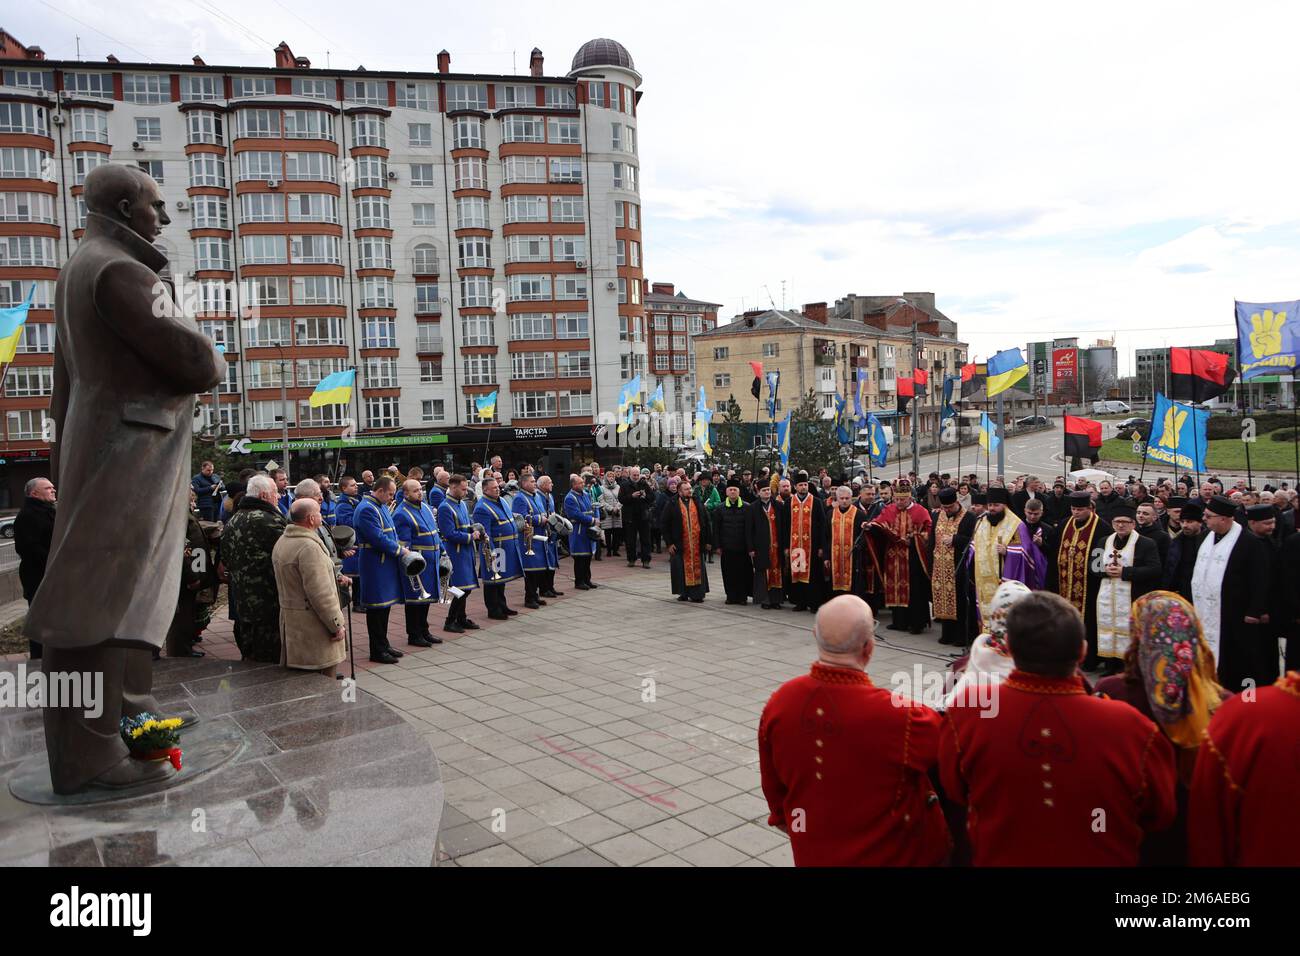 IVANO-FRANKIVSK, UKRAINE - JANUARY 1, 2023 - Participants are gathered at the Stepan Bandera monument on the 114th birthday anniversary of the Organis Stock Photo